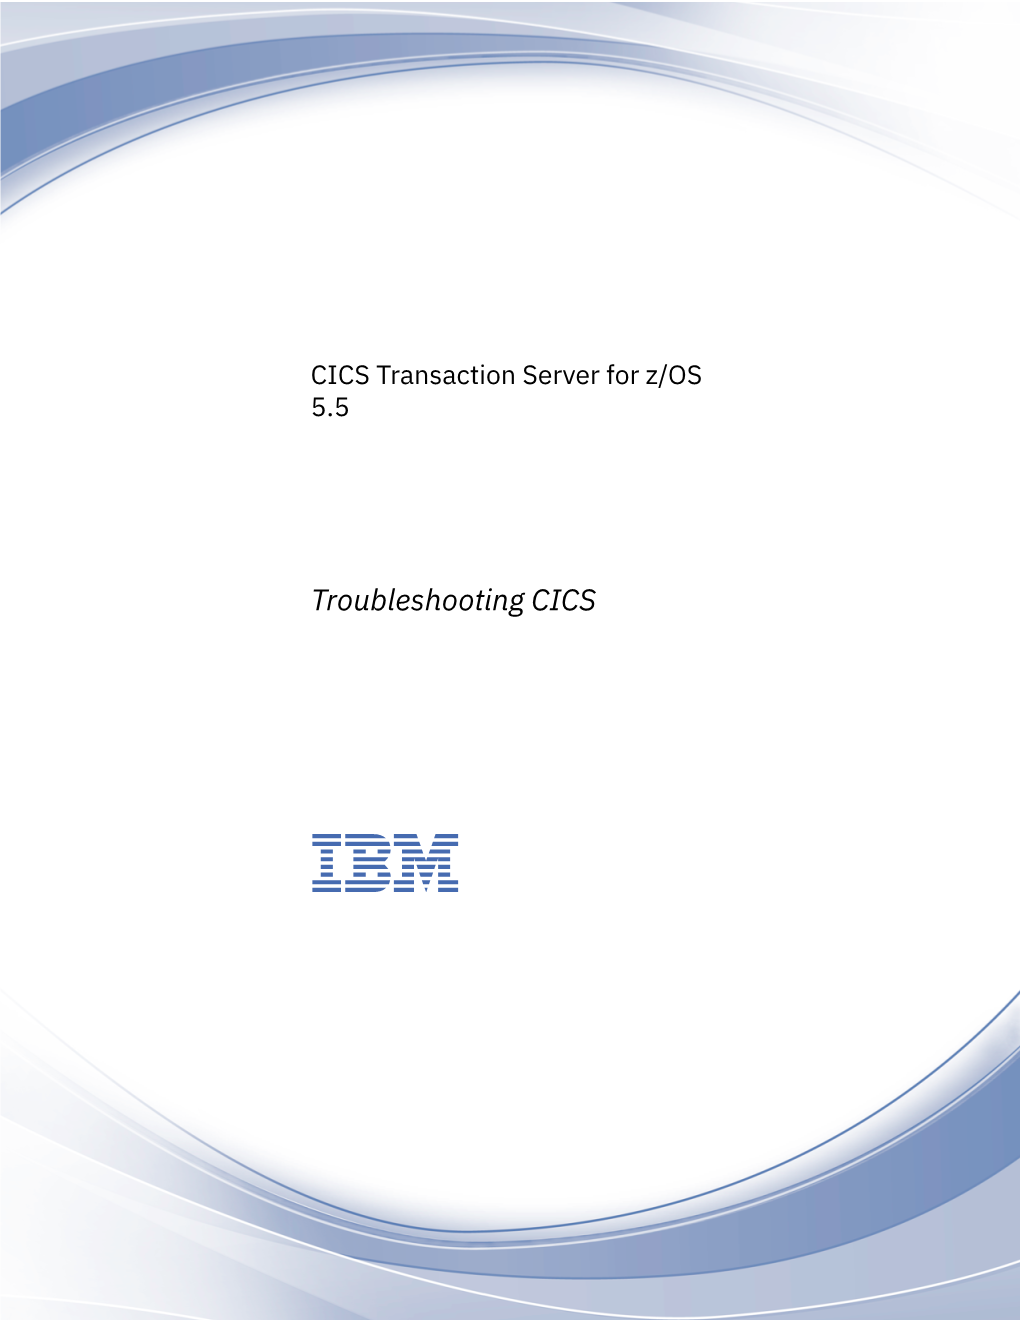 CICS TS for Z/OS: Troubleshooting CICS Chapter 1